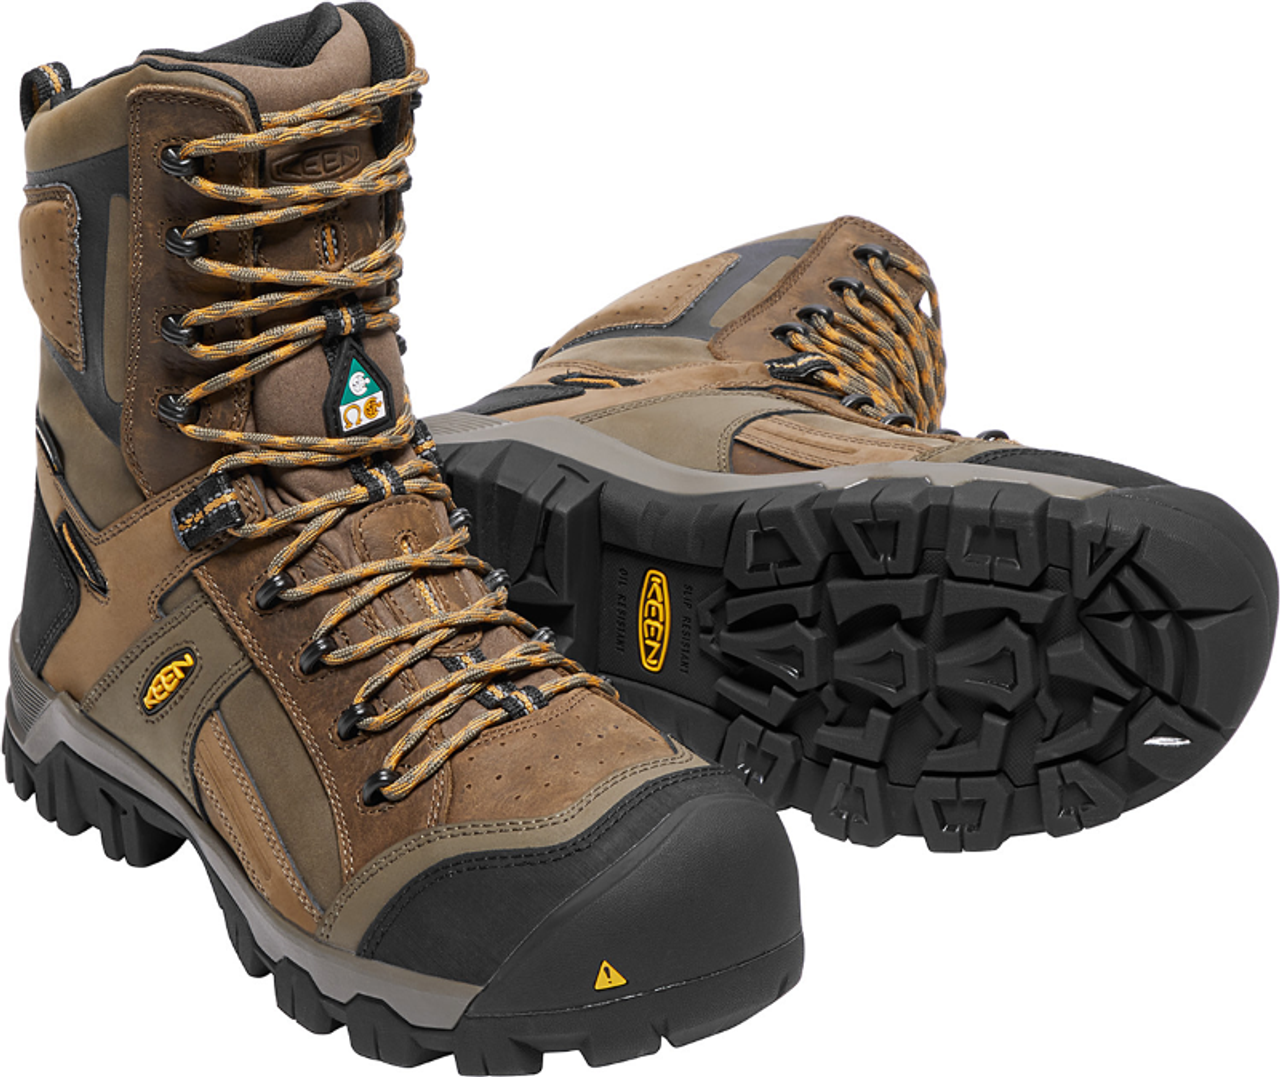 insulated and waterproof work boots